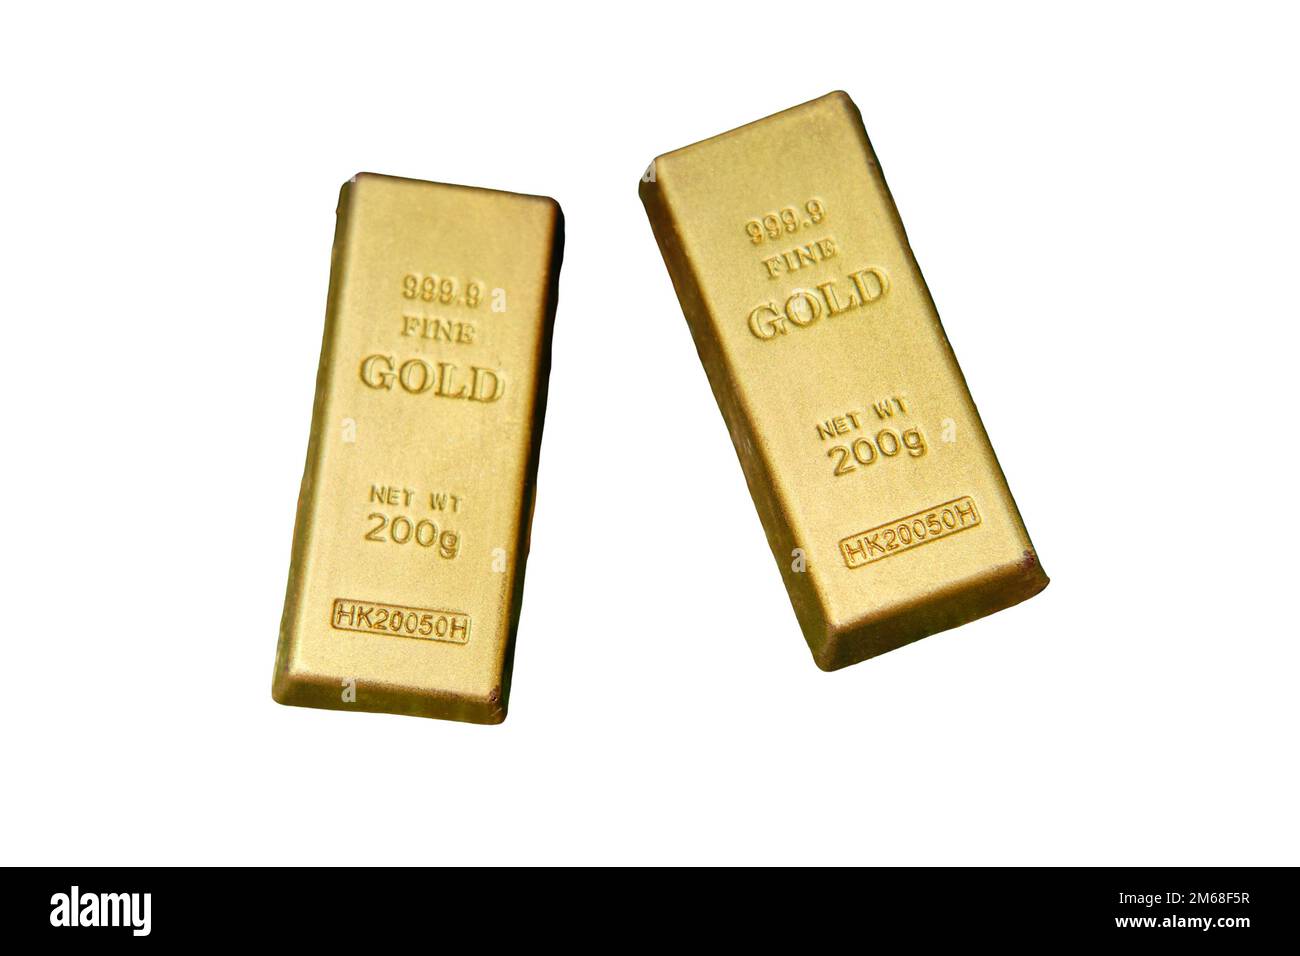 Two gold bars, isolated on a white background Stock Photo